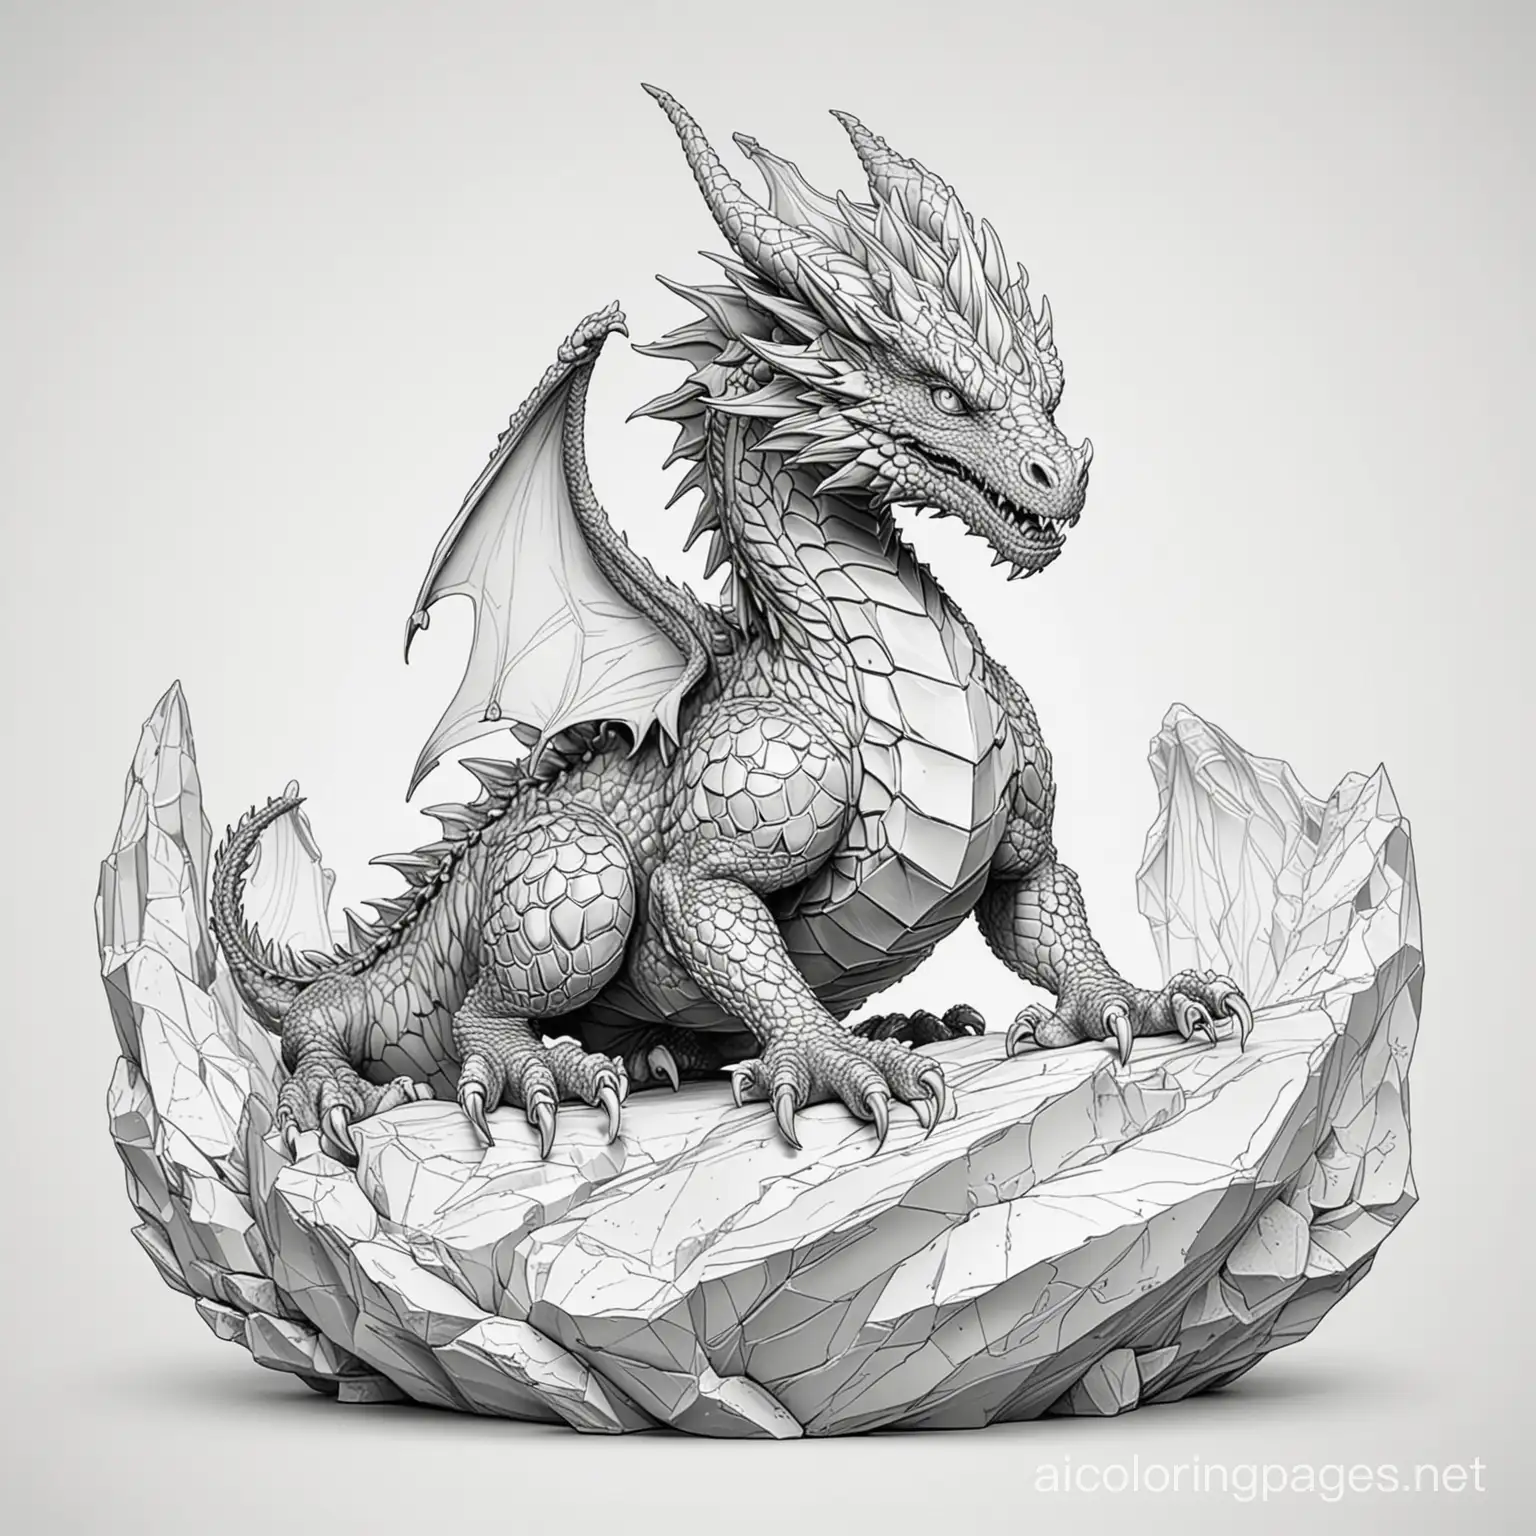 crystal rock dragon, Coloring Page, black and white, line art, white background, Simplicity, Ample White Space. The background of the coloring page is plain white to make it easy for young children to color within the lines. The outlines of all the subjects are easy to distinguish, making it simple for kids to color without too much difficulty